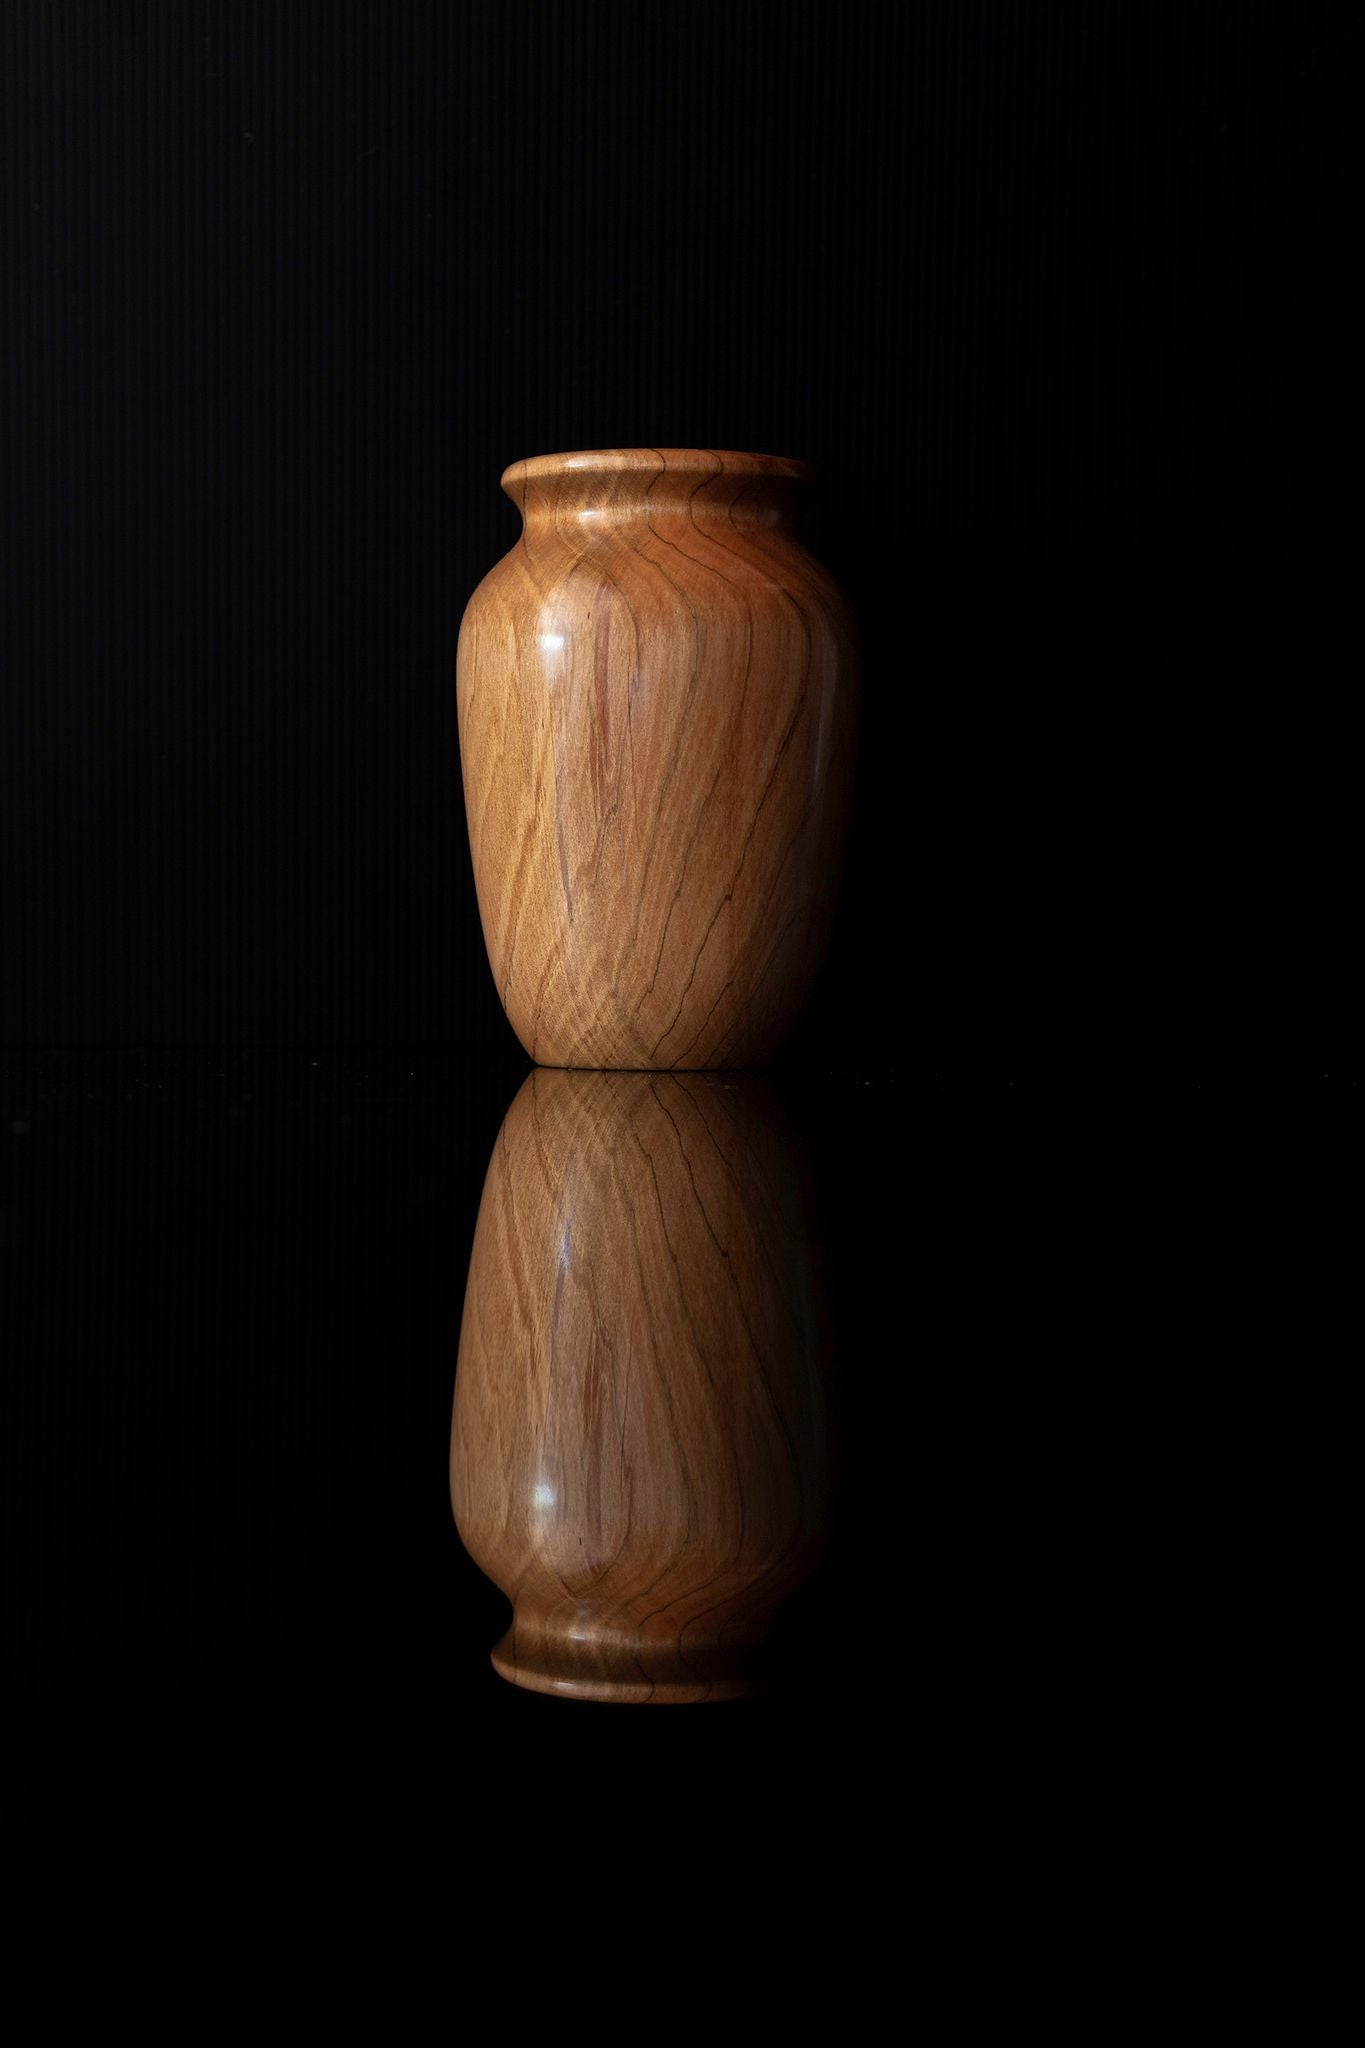 New Zealand Tawhai Beech Wood Vase by Woodturner Mark Russell No369